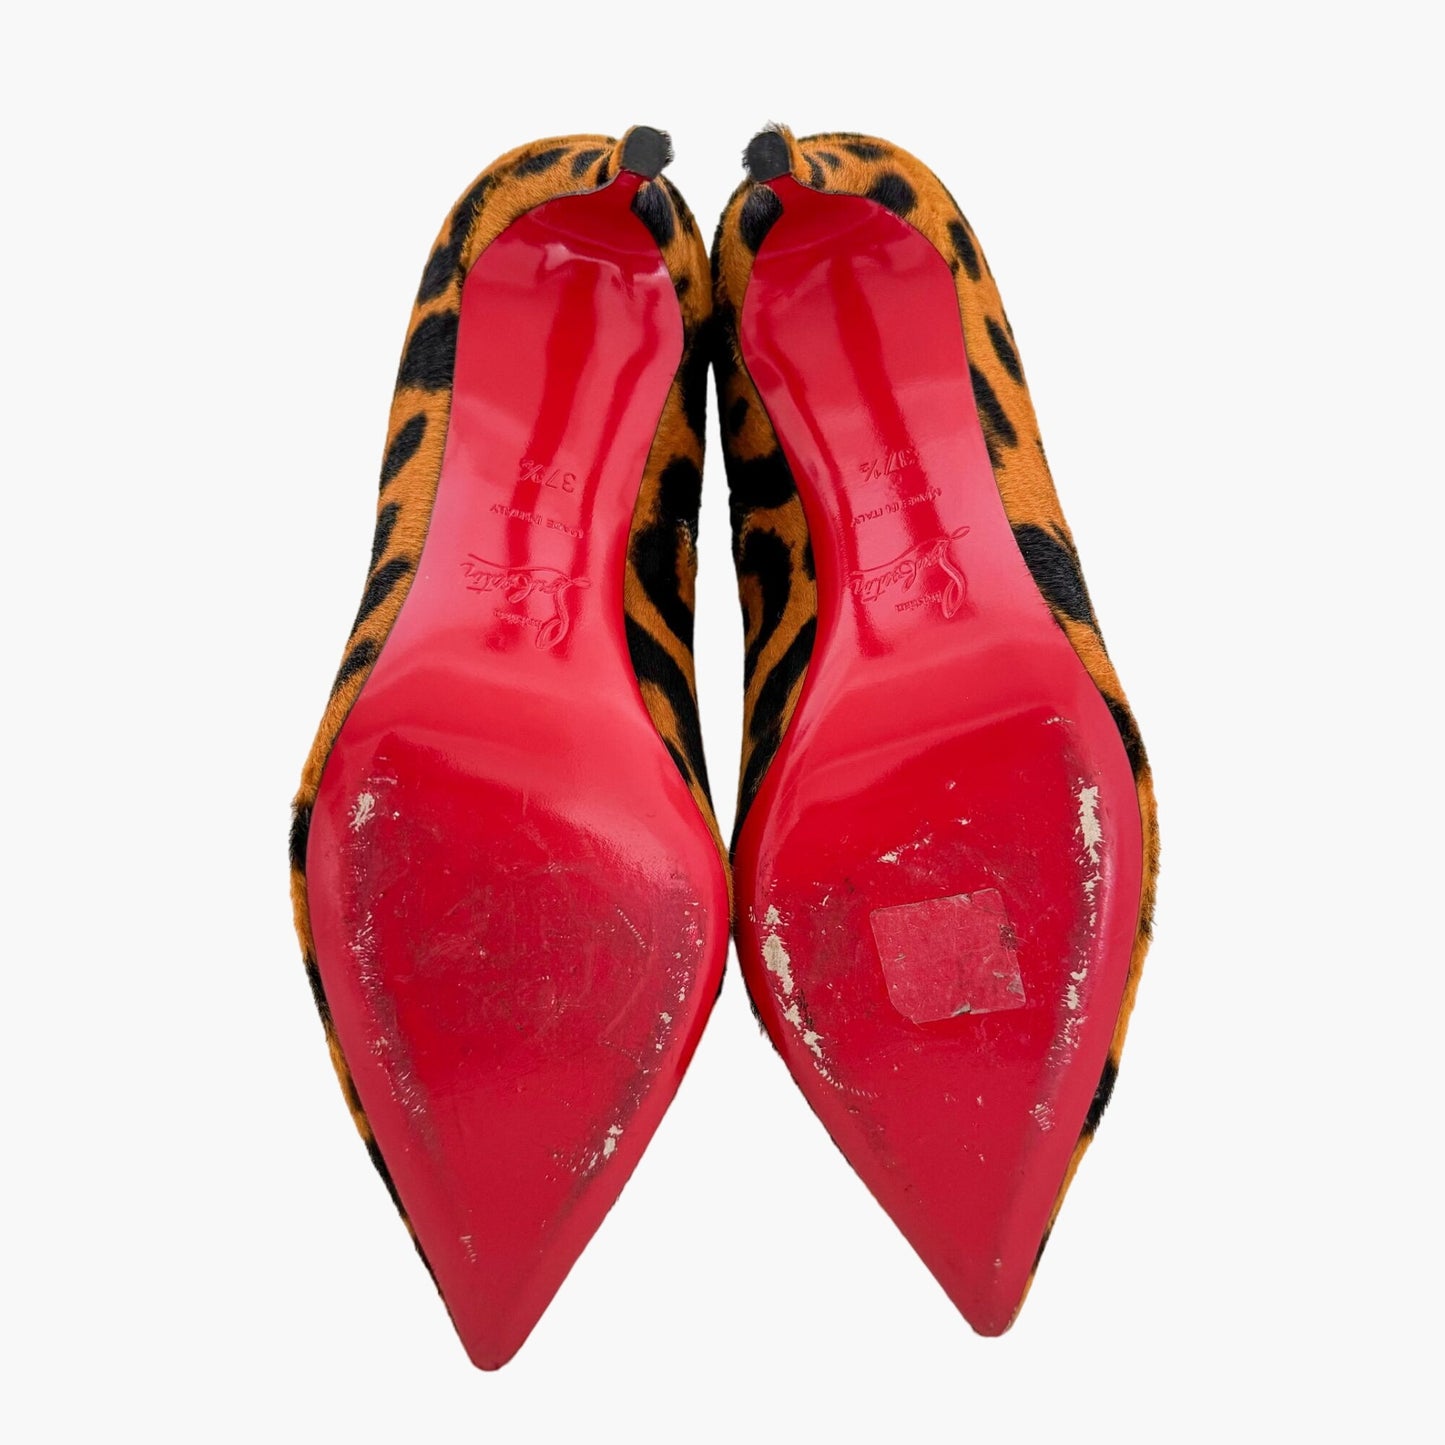 Christian Louboutin So Kate Booty 85 in Spicy Leopard Pony Hair Size 37.5